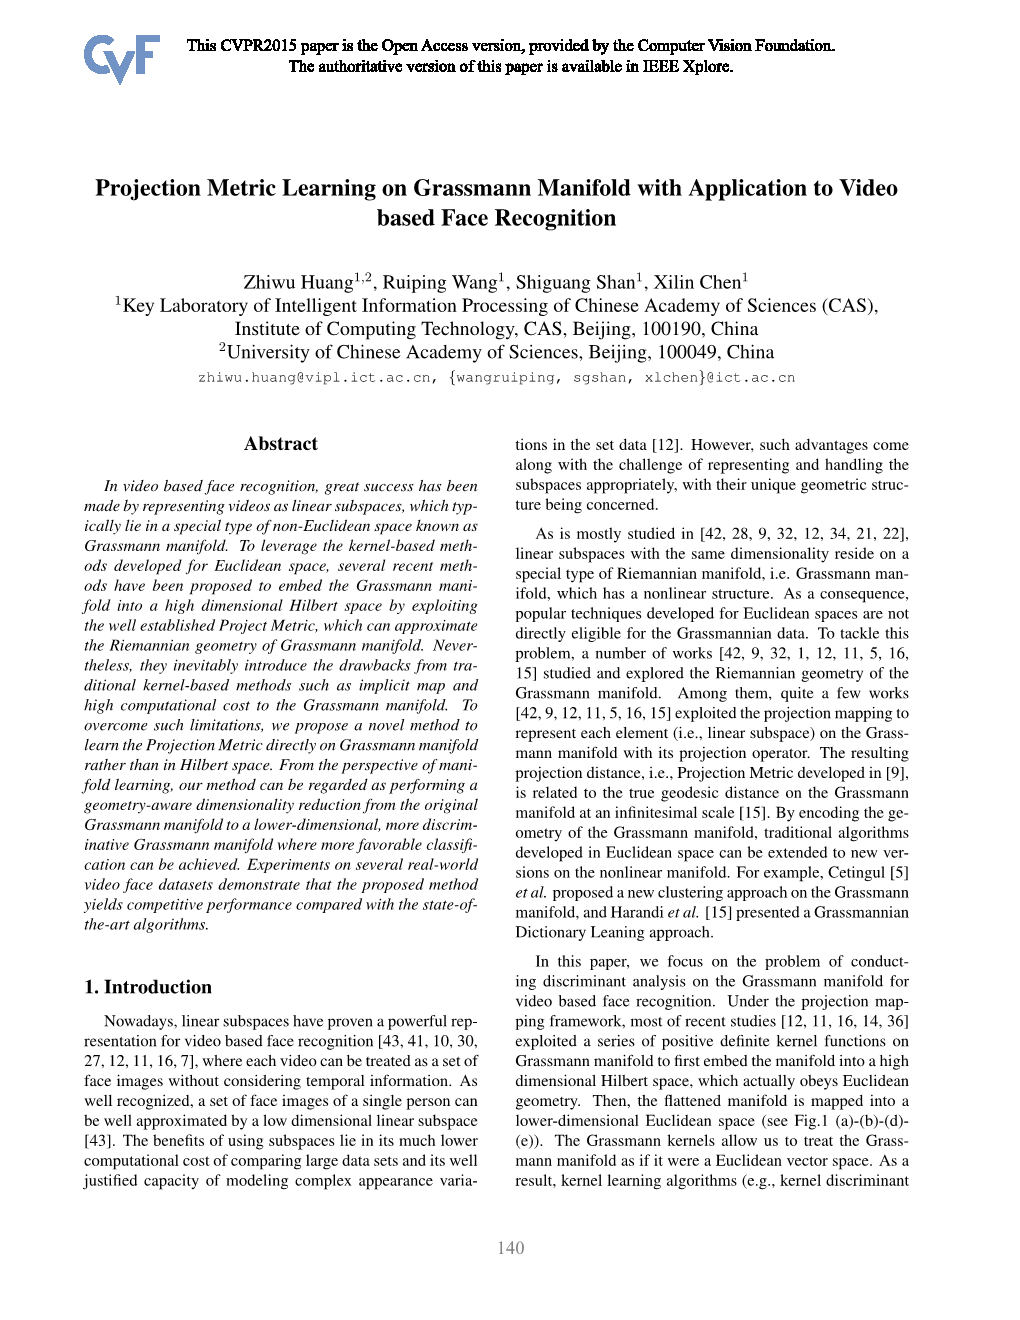 Projection Metric Learning on Grassmann Manifold with Application to Video Based Face Recognition